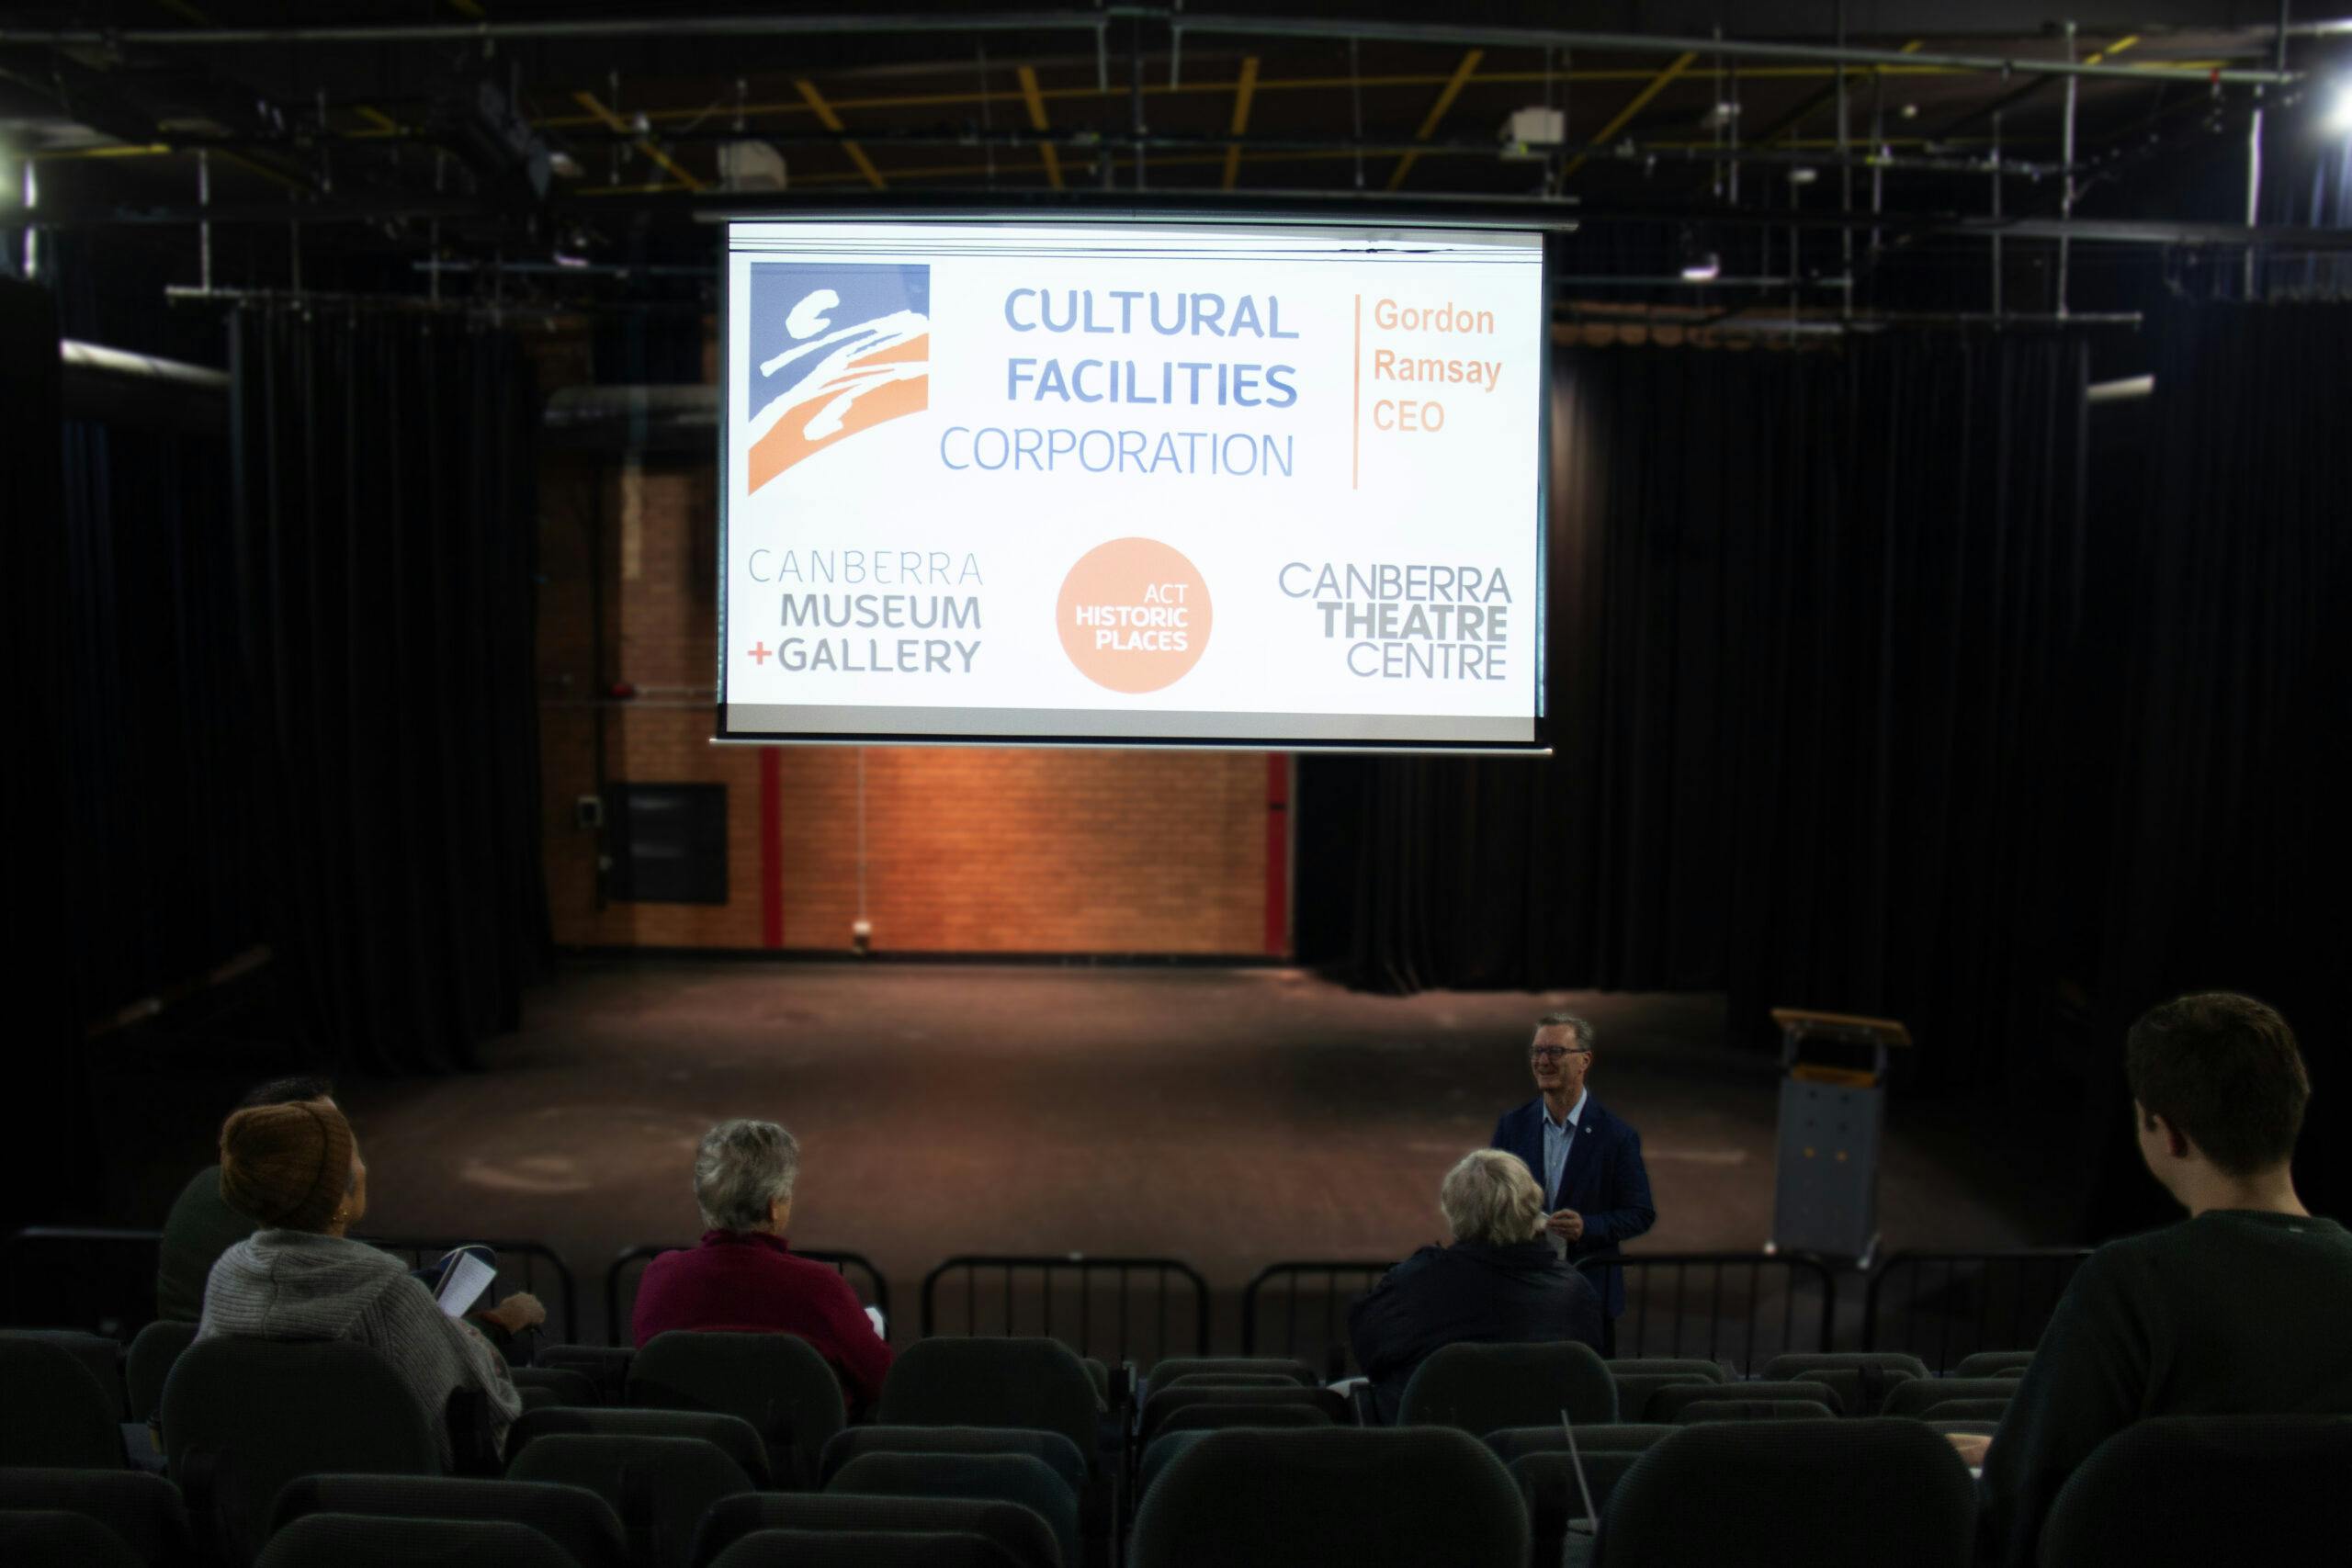 A small theatre as photographed from the back row - several people in the seats watching a man deliver a presentation.